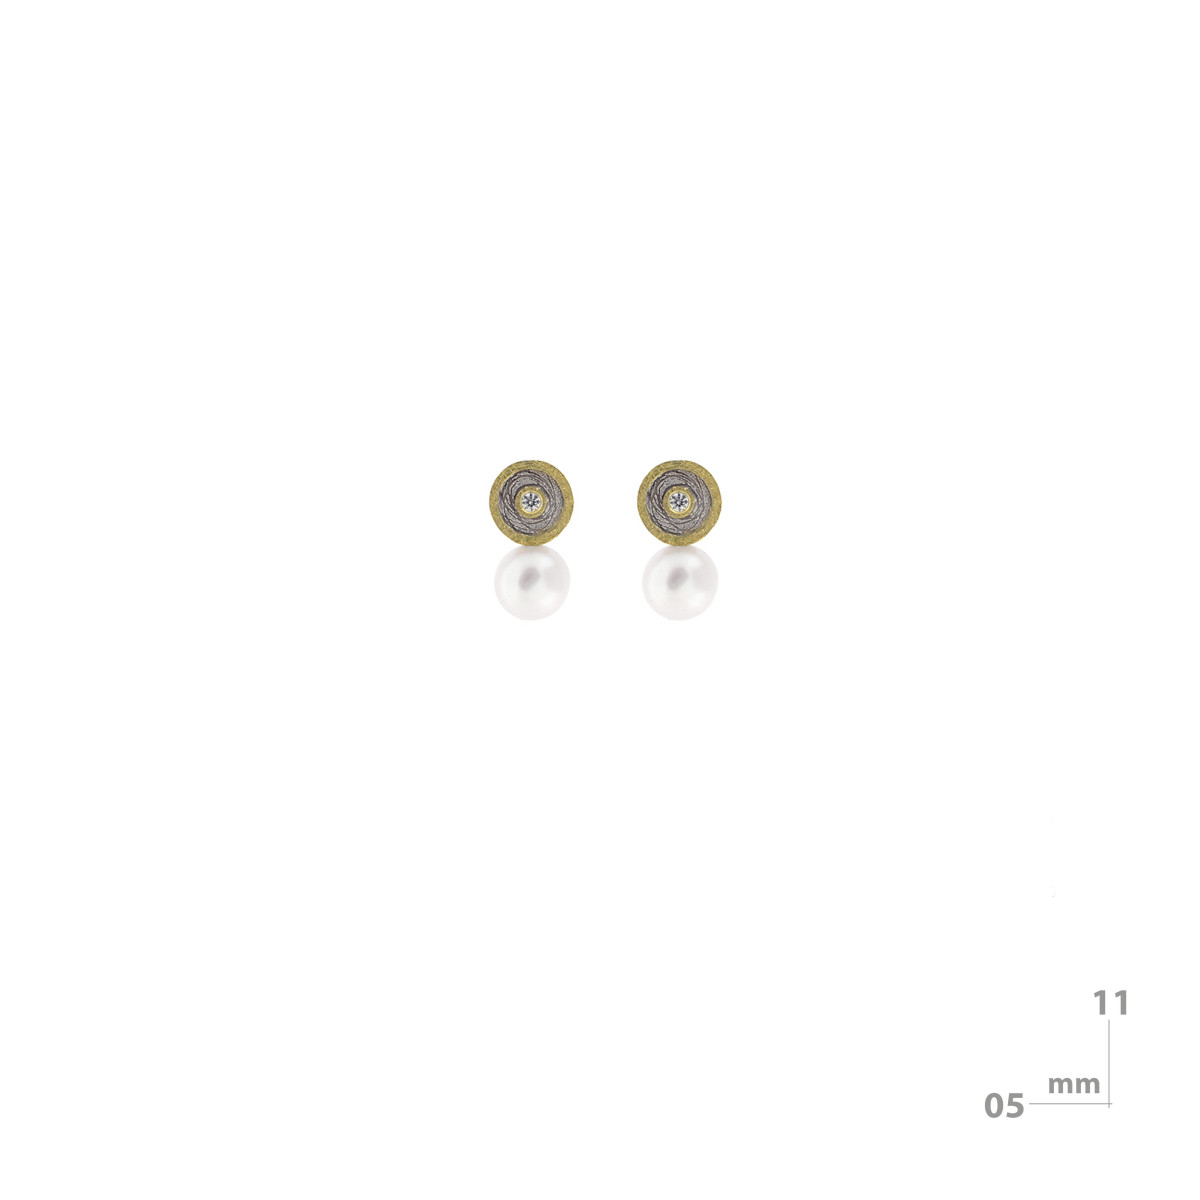 Silver, gold, cultured and shiny pearl earrings